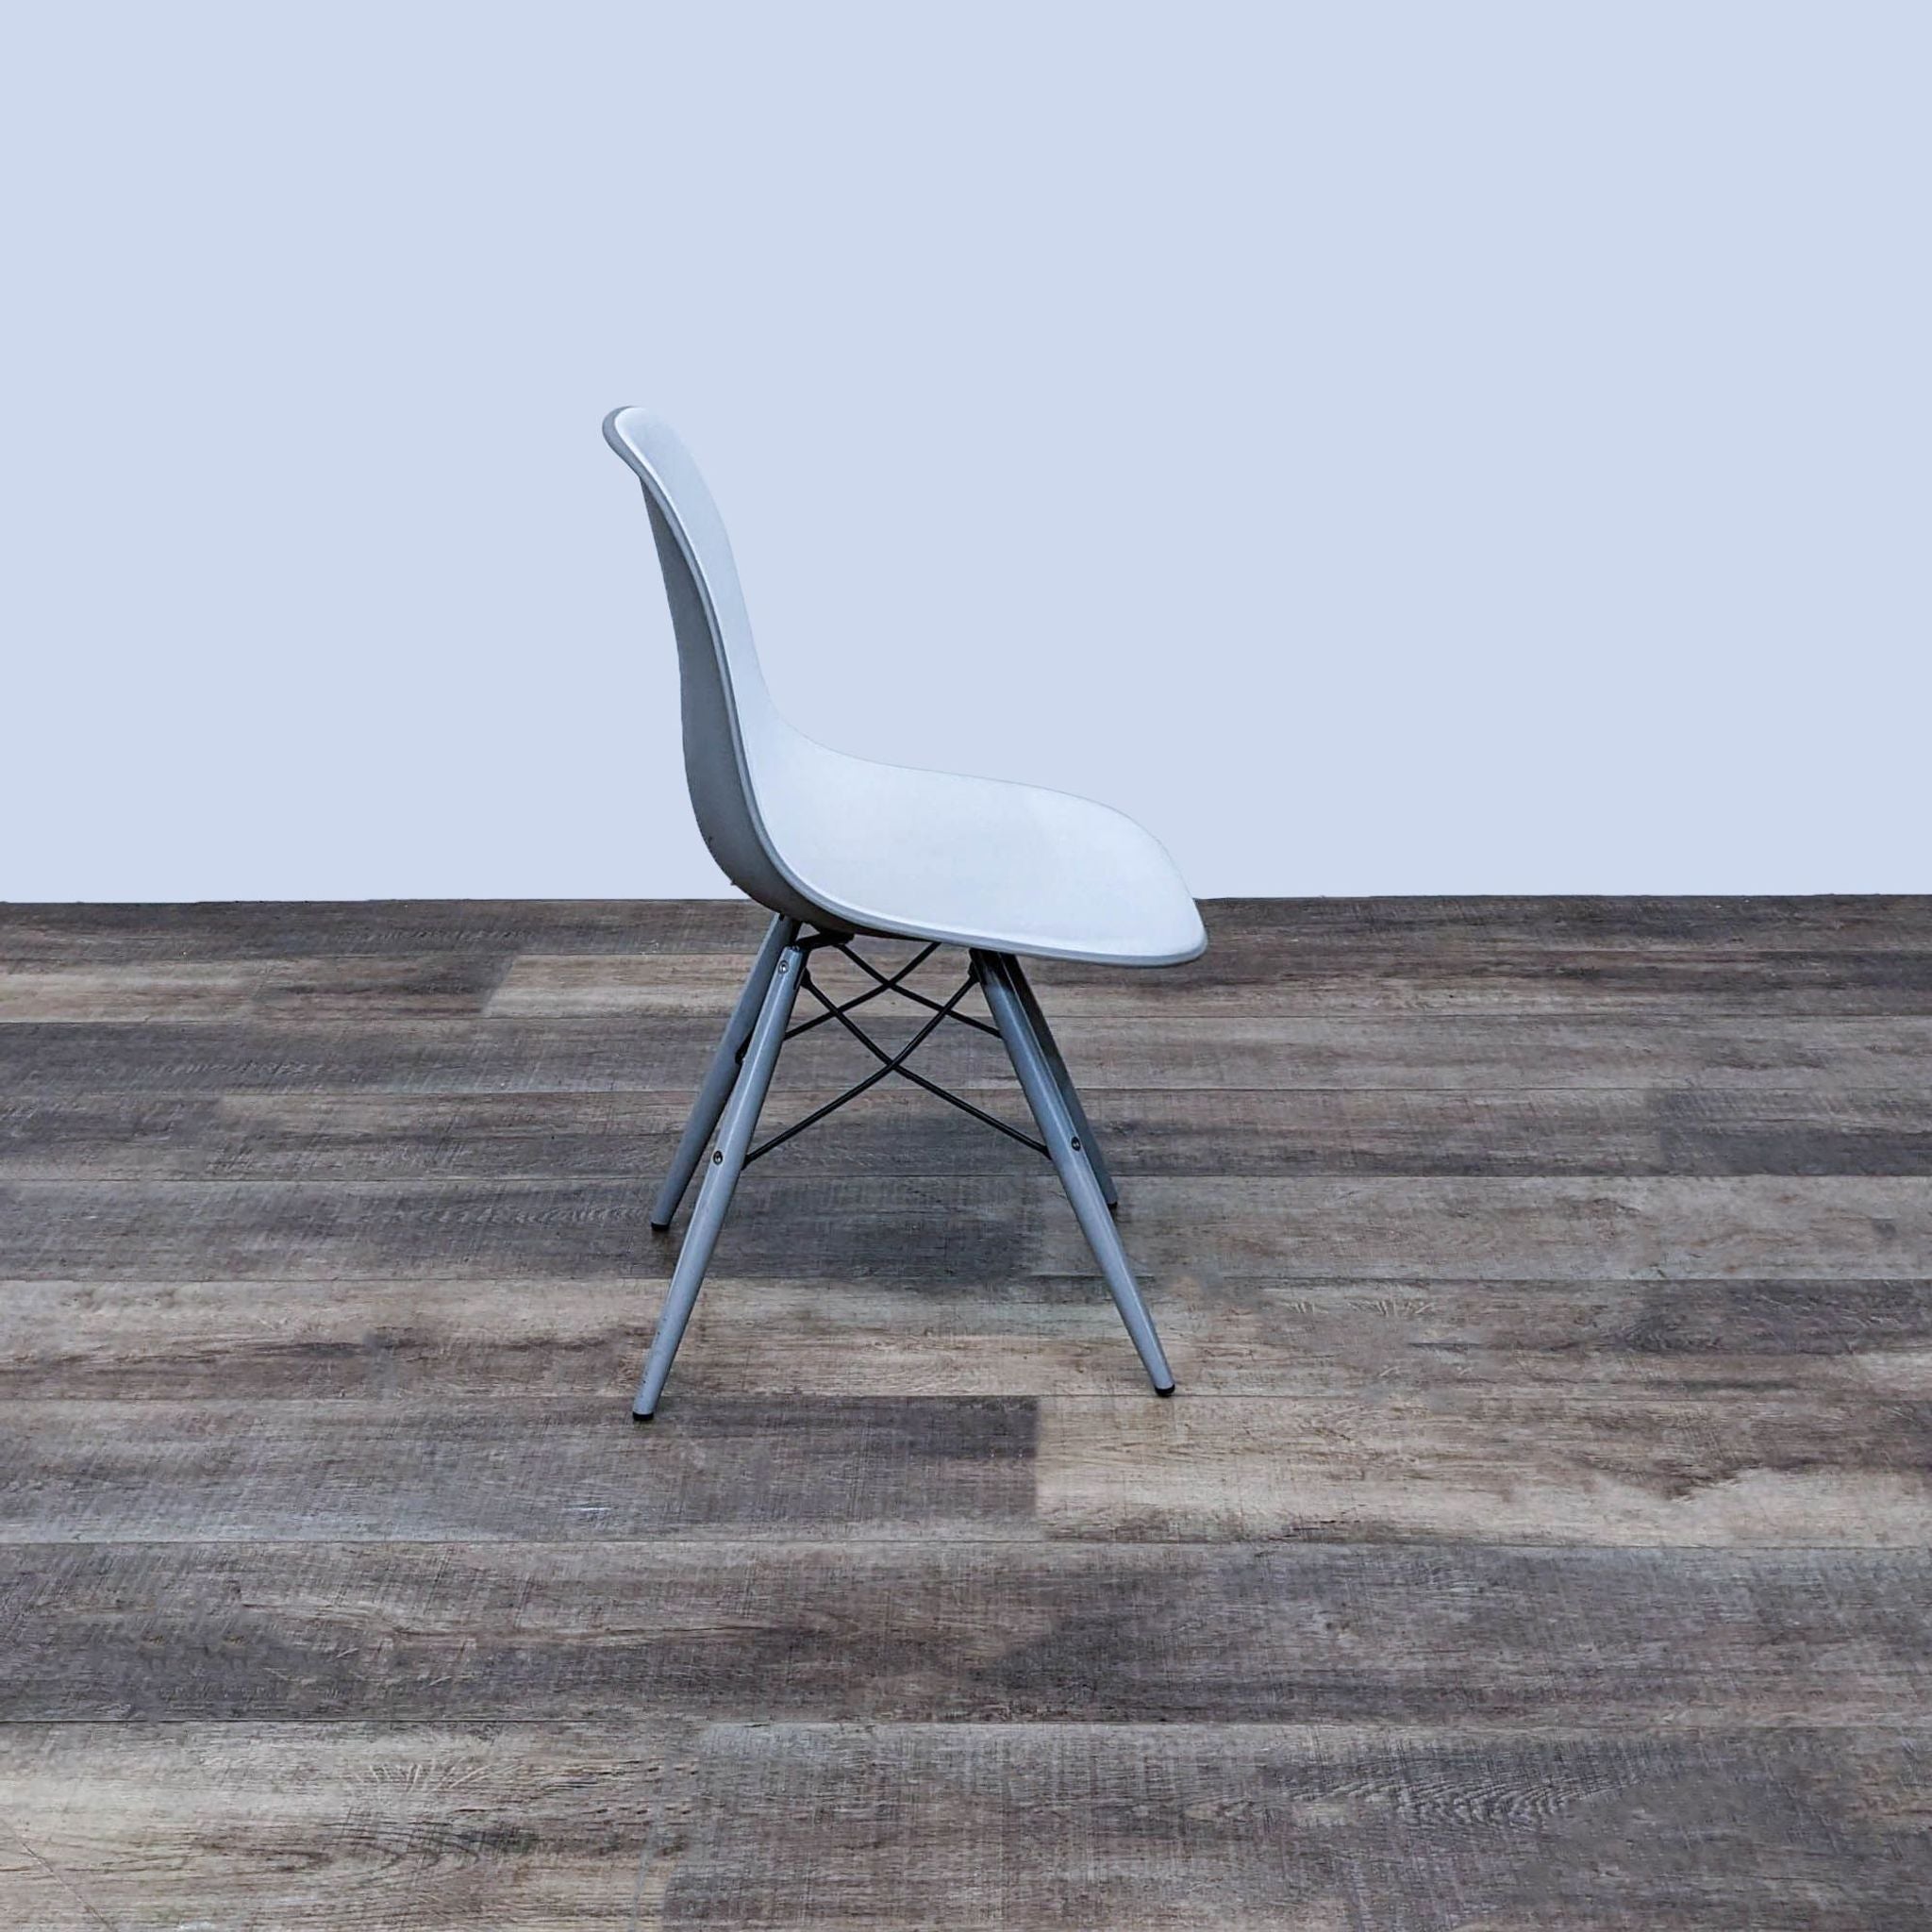 Modern side chair by Reperch with grey and white two-toned design and Eiffel base, displayed against a neutral background.